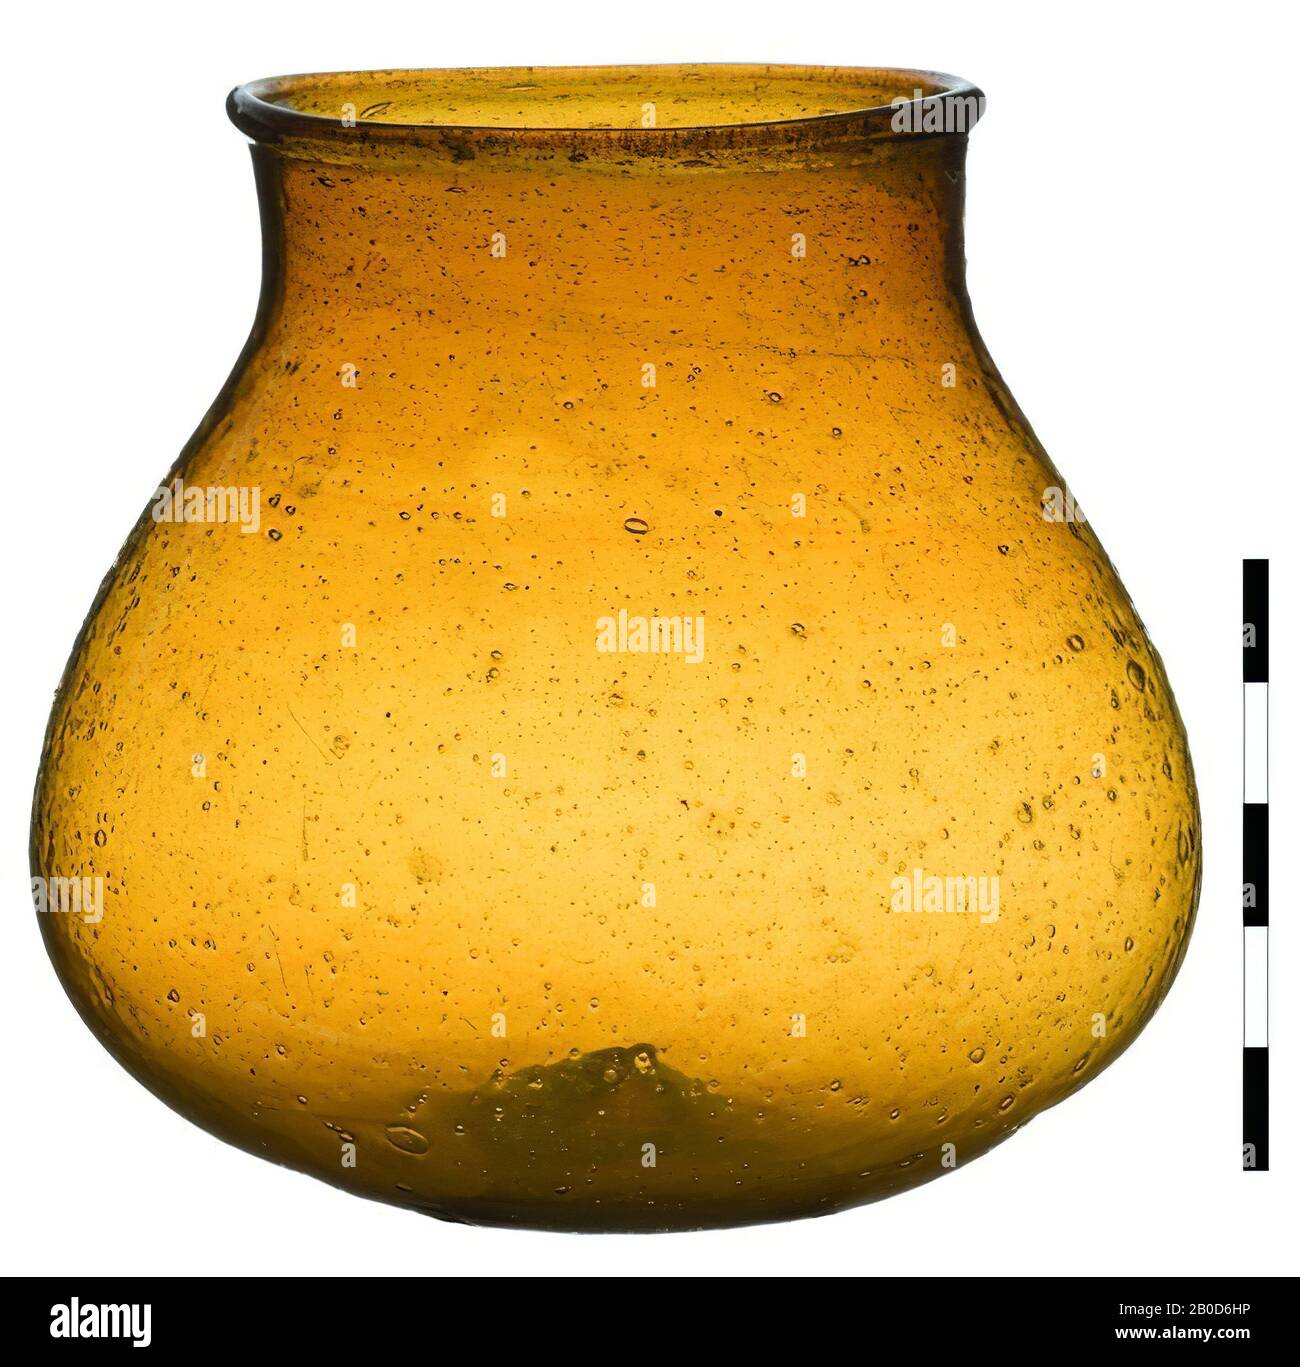 Globular beaker, yellowish-brown (amber colored). Slighty thickened outsplayed rim, incurved neck and low maximum girth. At the base pushed in with a pointed tool. Punty ring on the base (?), 00-00 mm. Complete. Many small and larger bubbles., Cup, glass, max. H: 98 mm, vmeb 585-610, Netherlands, North Brabant, Bergeijk, Bergeijk, Fazantlaan Stock Photo